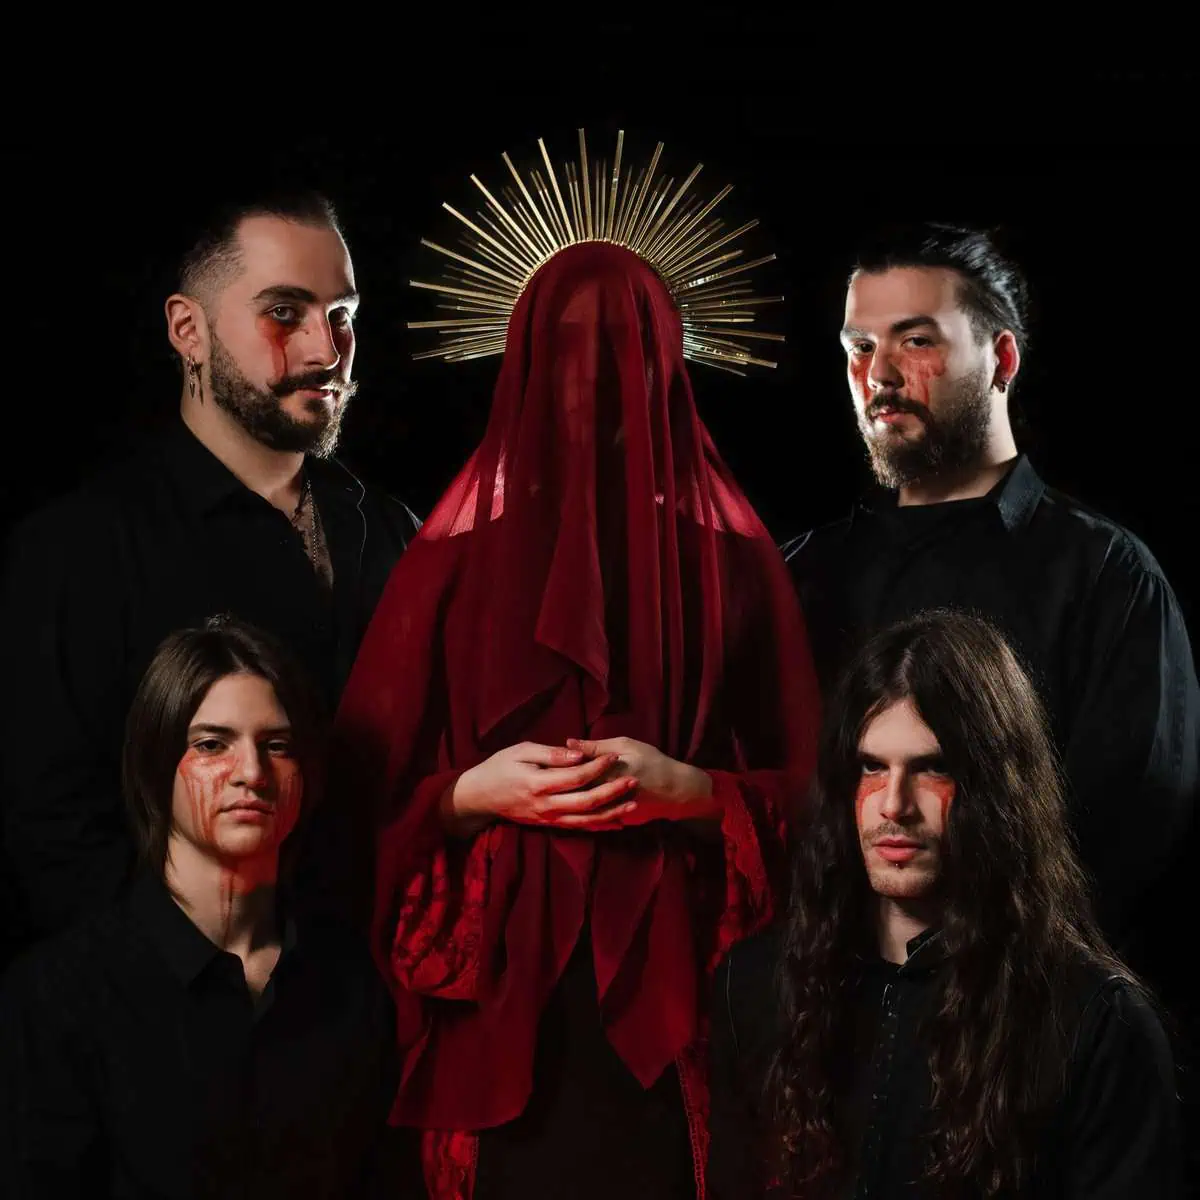 You are currently viewing JEHOVAH ON DEATH single “Goya’s Witches” από το νέο ομώνυμο EP